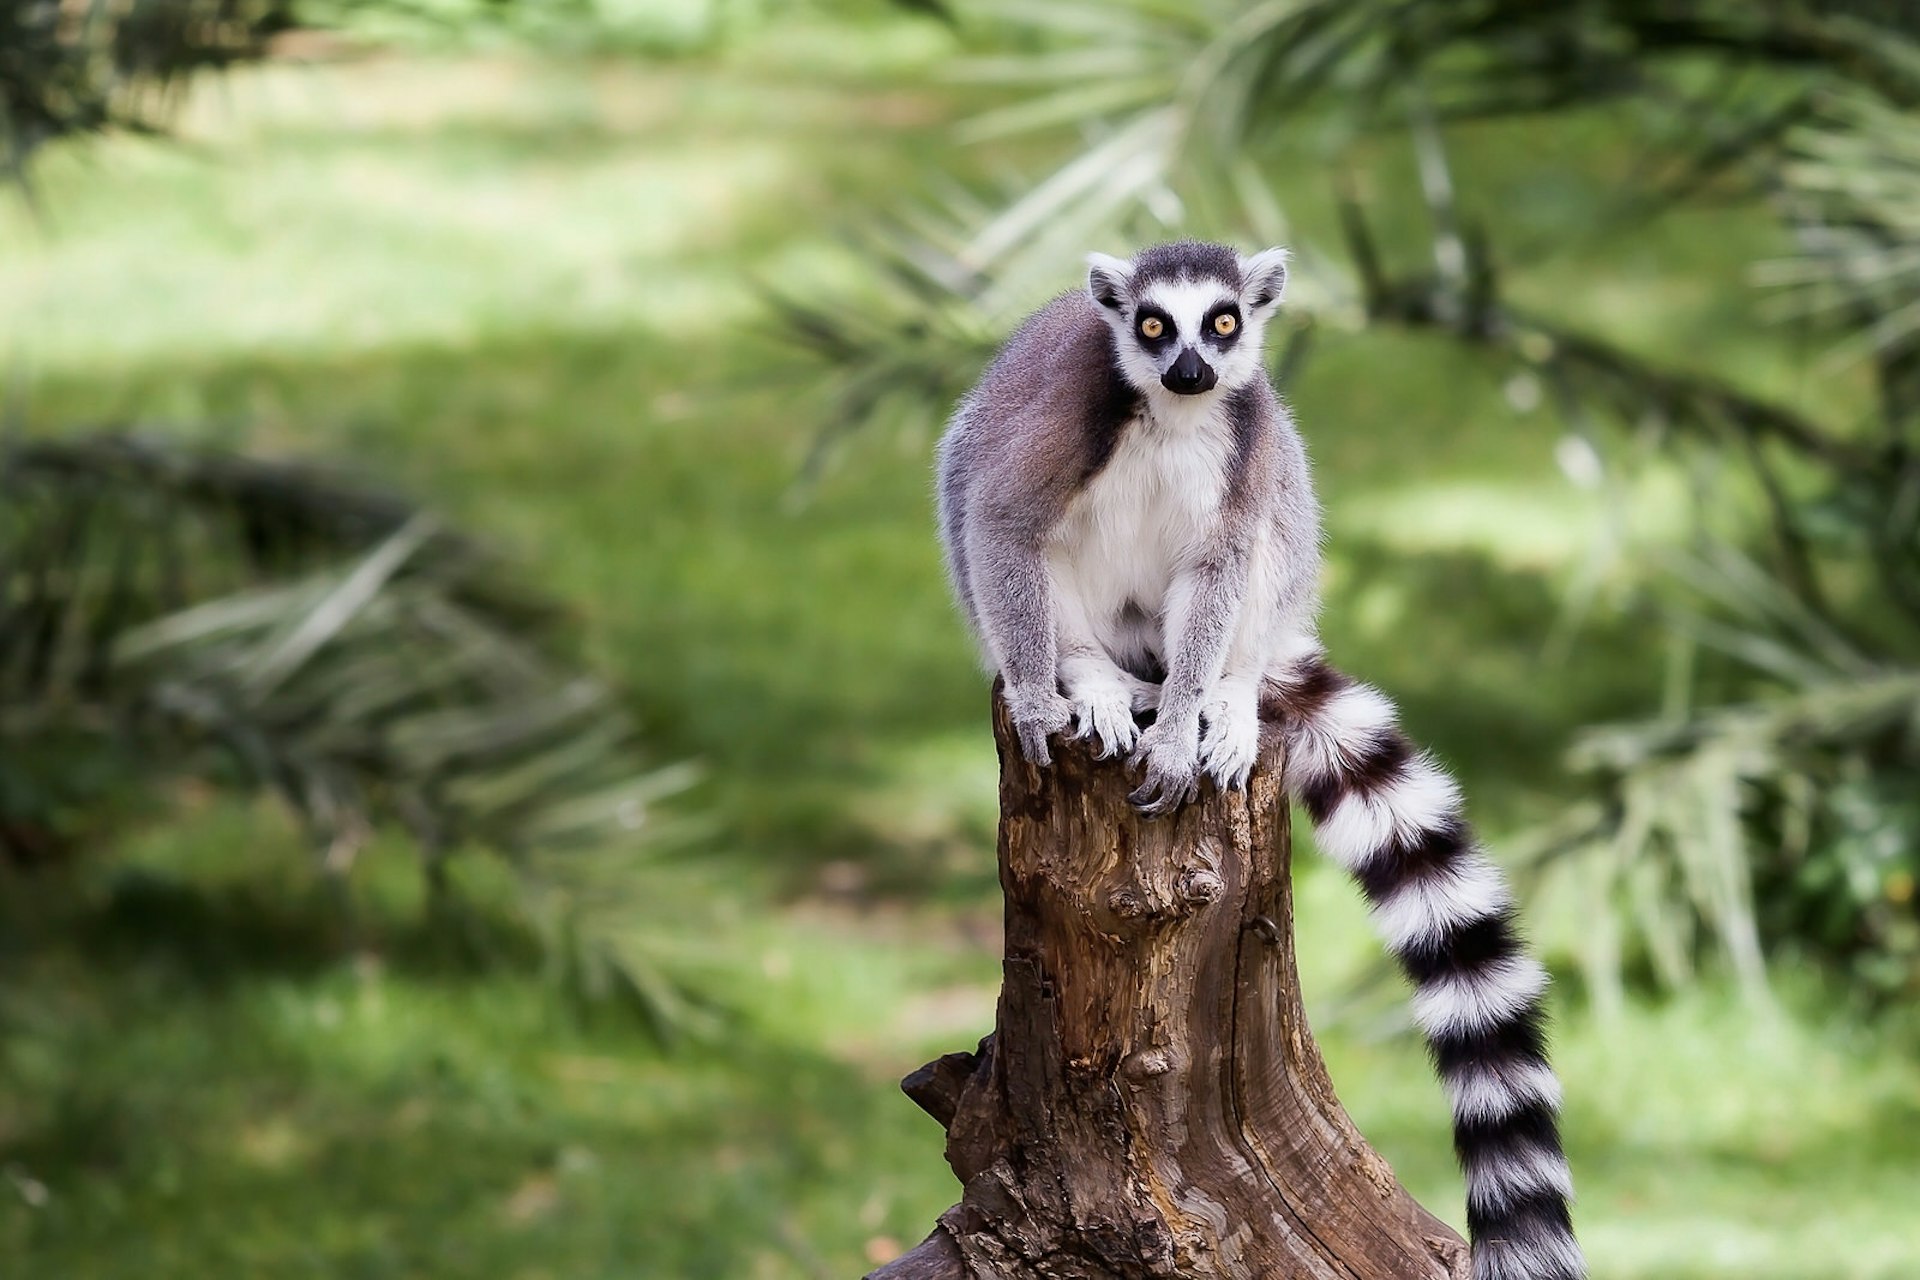 A ring-tailed lemur poses for the camera in Madagascar